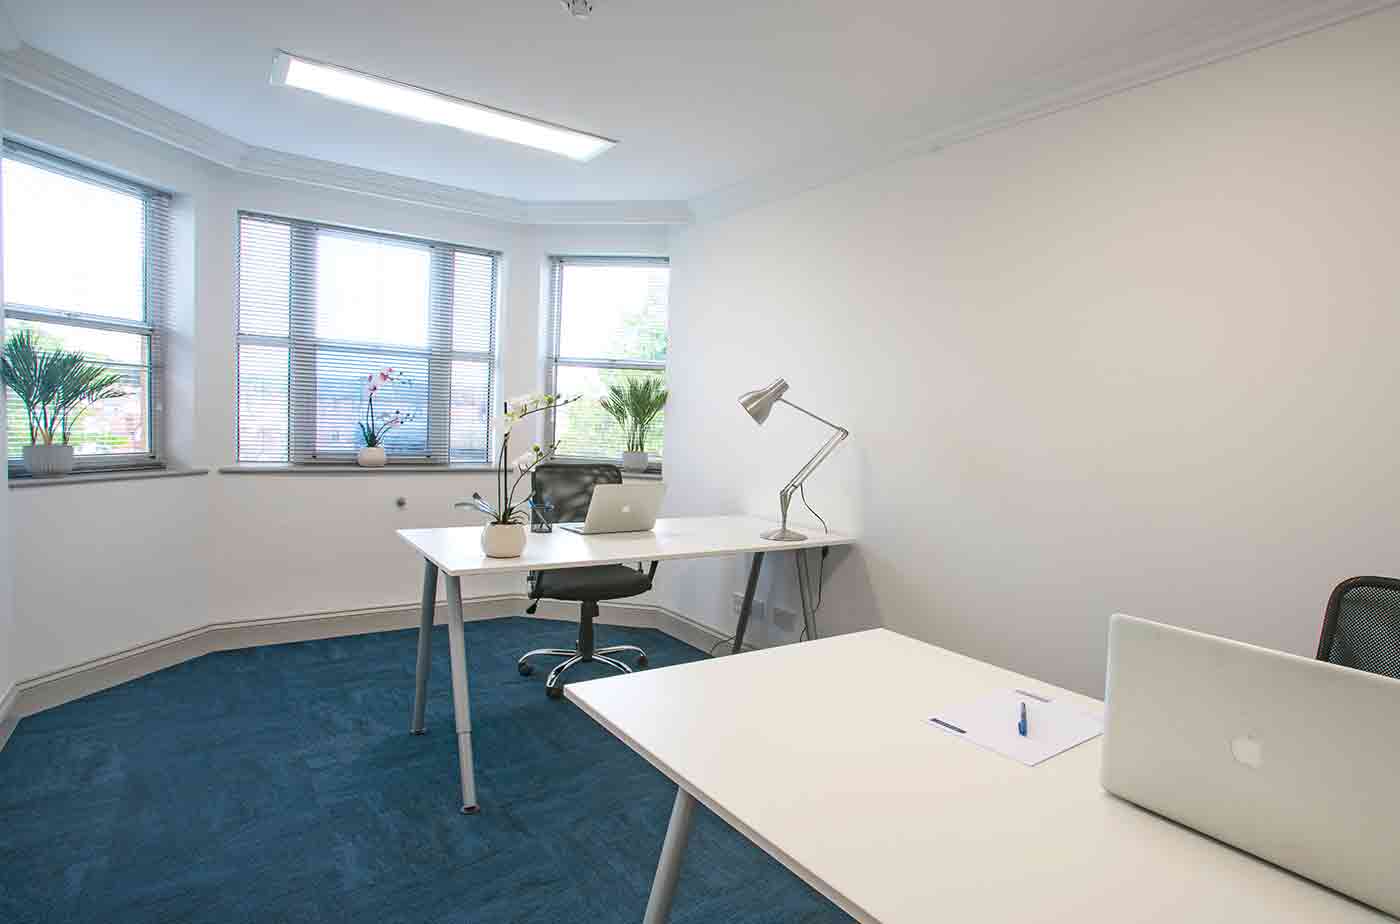 Flexible office space and current business trends